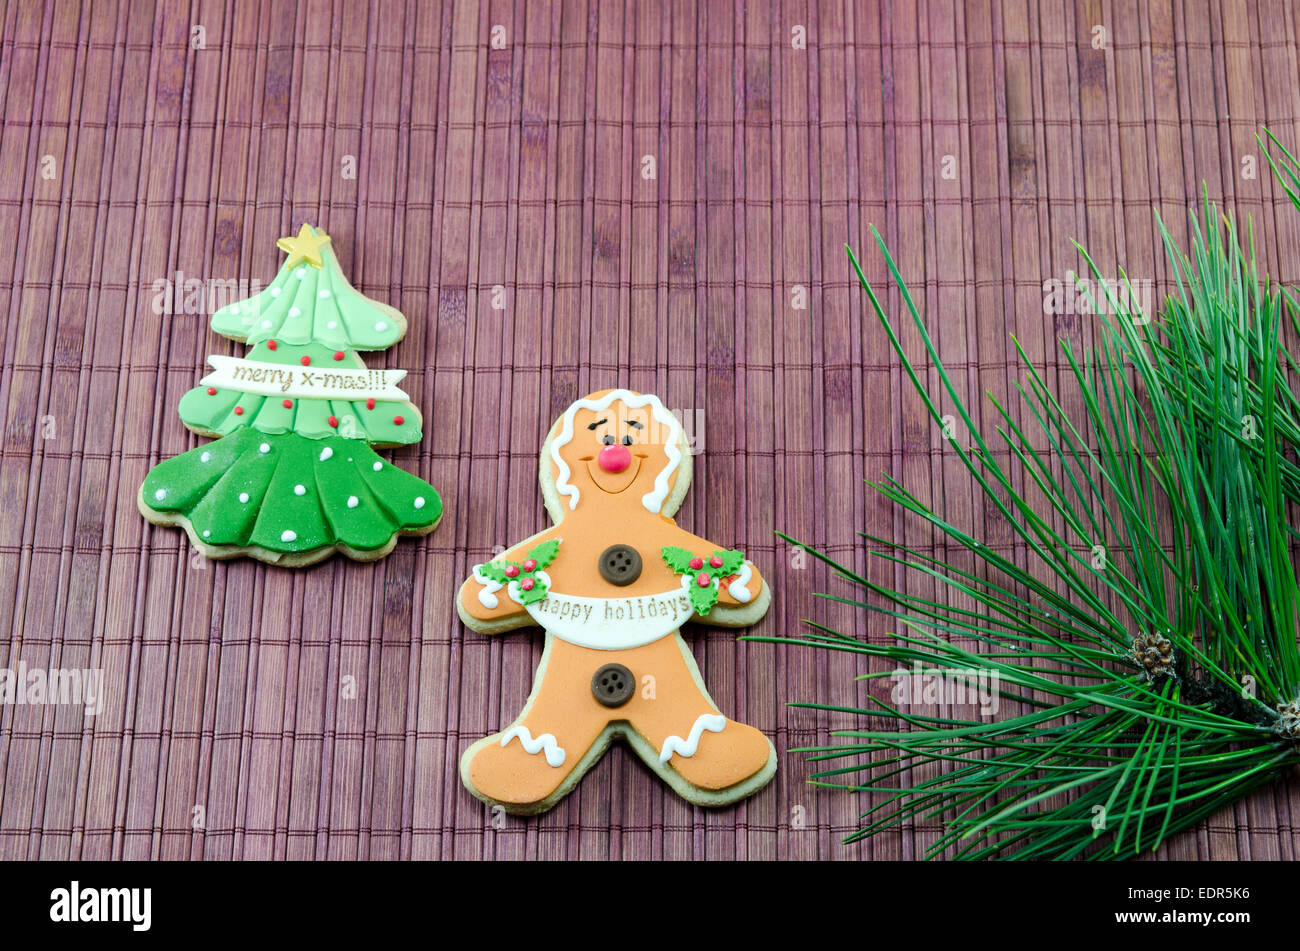 Edible gingerbread and a Christmas tree decorated with pine needles on a bamboo surface Stock Photo